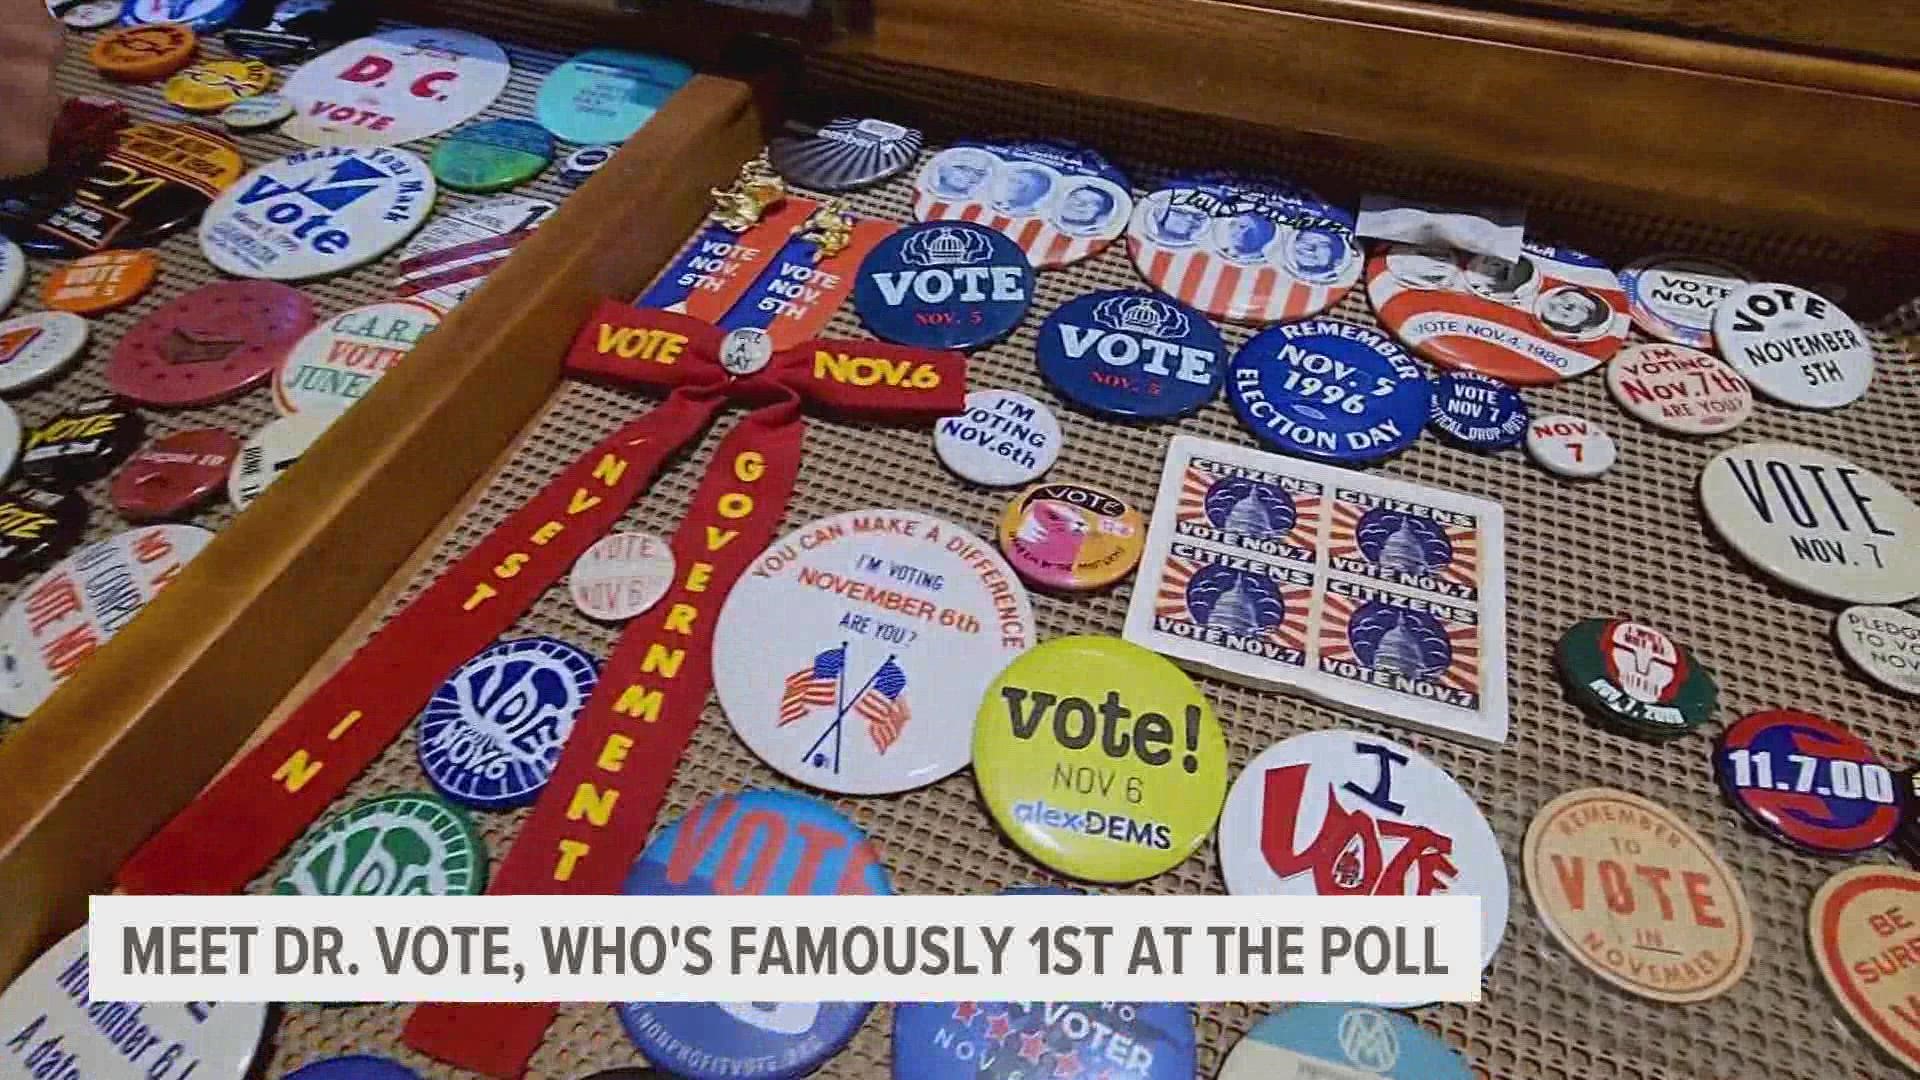 John Olsen, a.k.a. Dr. Vote, collects election buttons, stickers and even soap dating back to the 1800s.